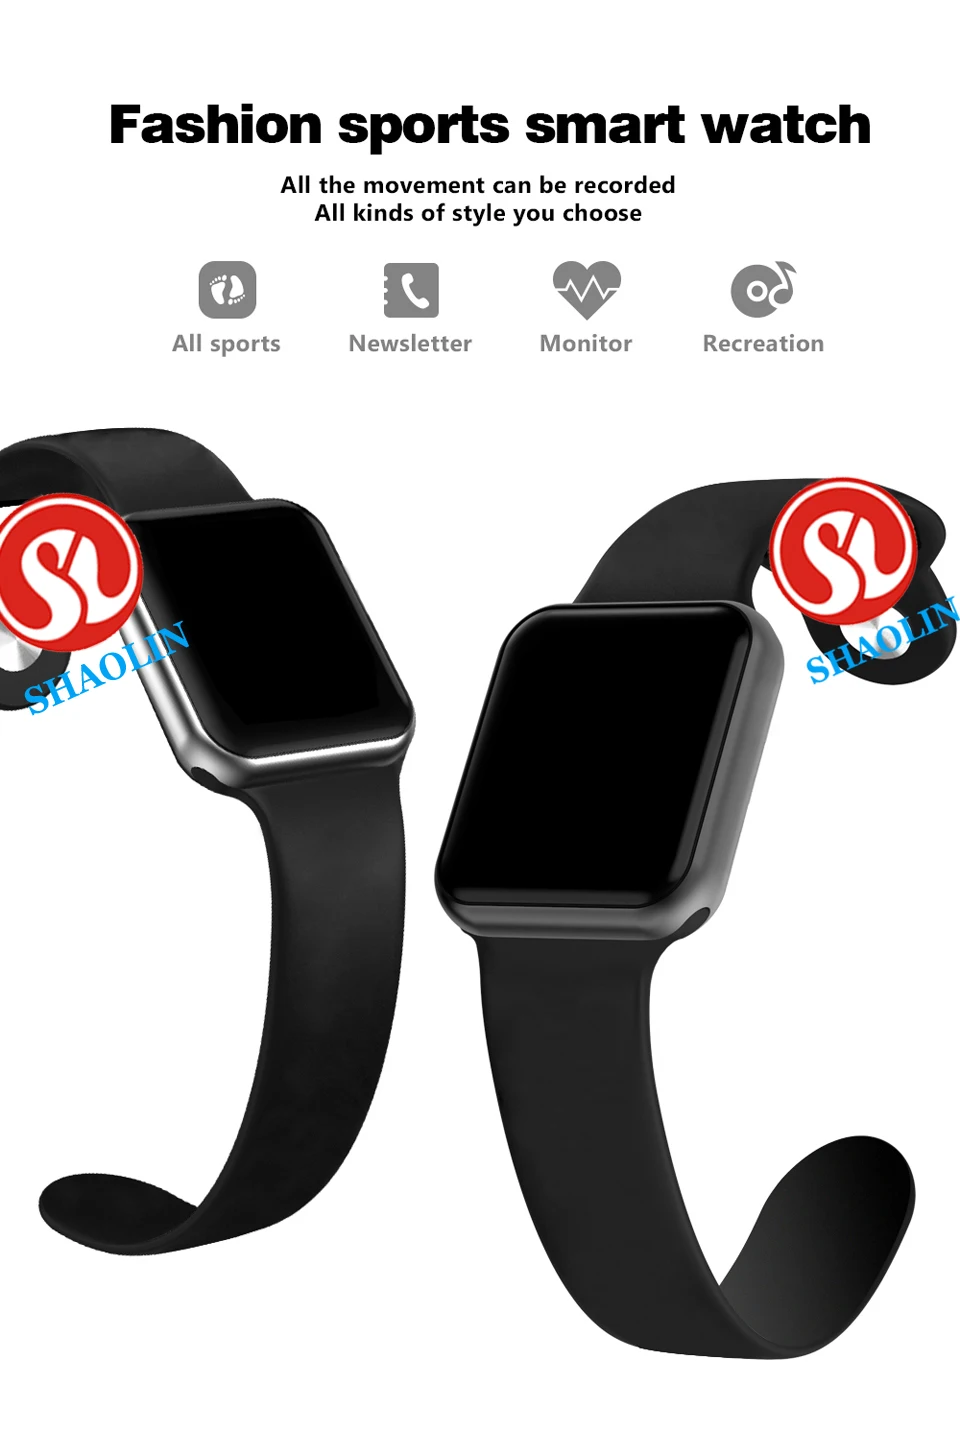 SHAOLIN Bluetooth Smart Watch Heart Rate Monitor Smartwatch Wearable Devices for apple watch iPhone IOS and Android Smartphones-01